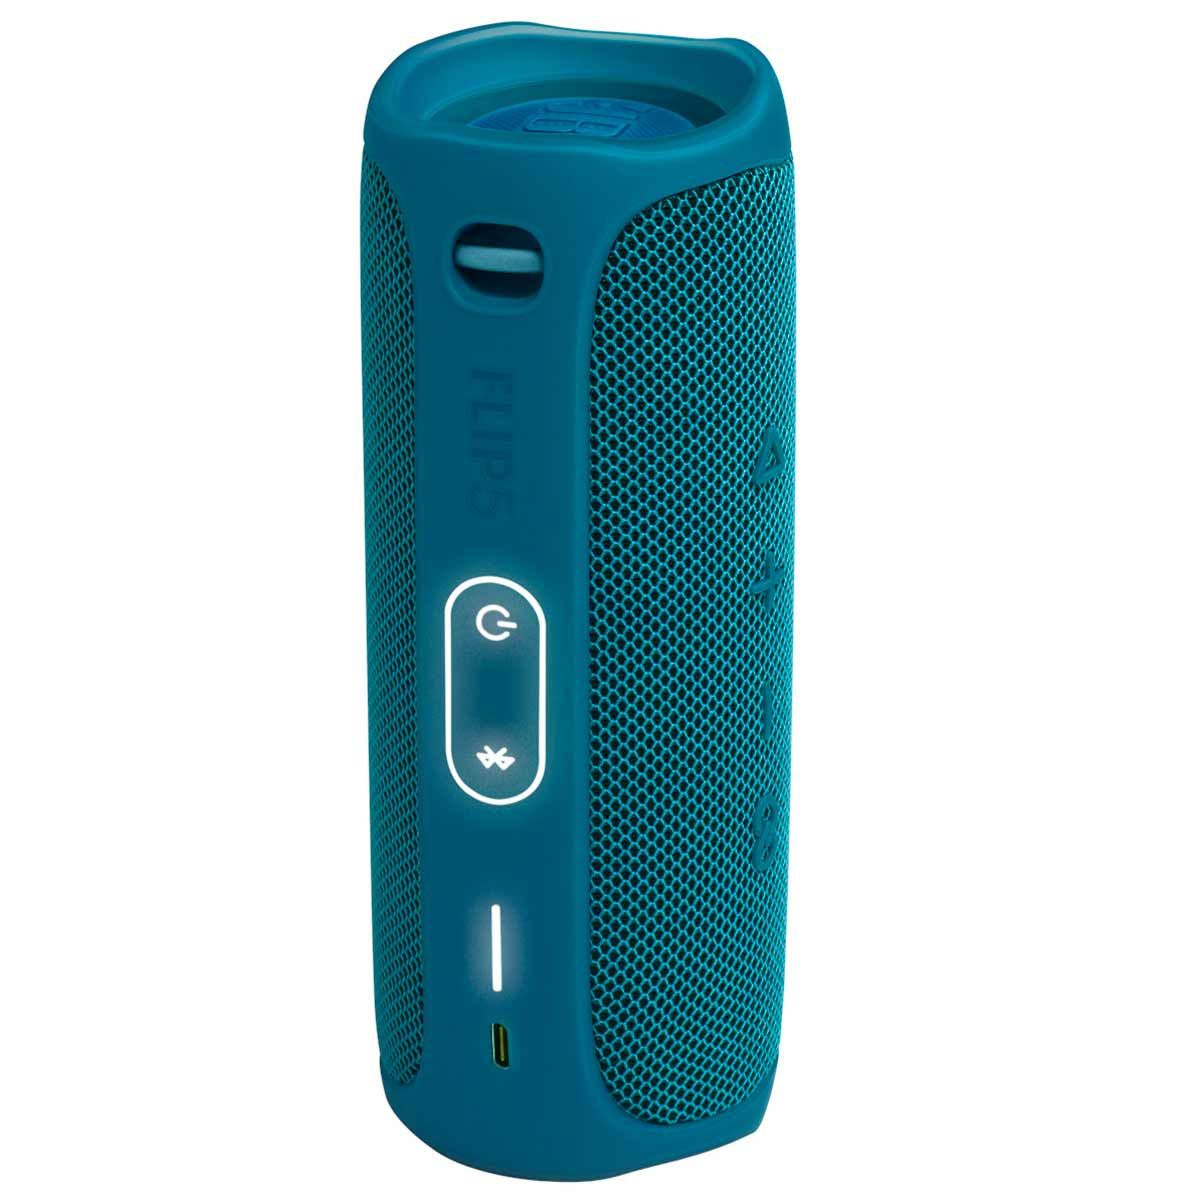 JBL Flip 5 Eco Edition Waterproof Bluetooth Speaker - Ocean Blue standing on end with buttons lit up